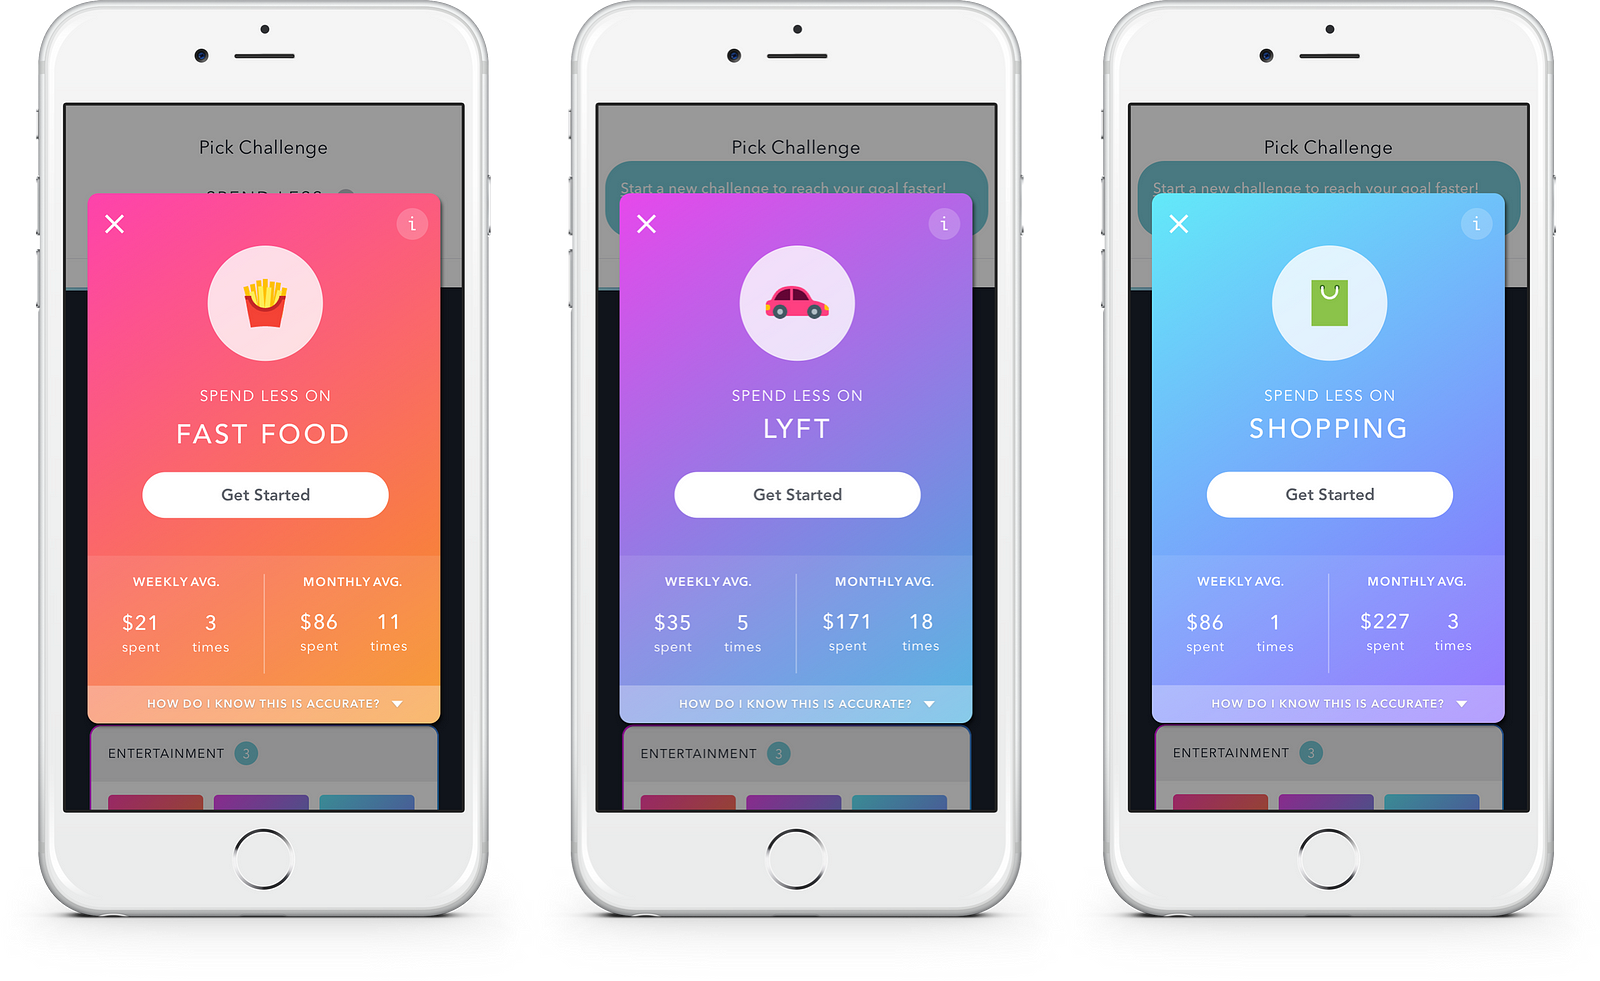 Meet Pluto The Personal Finance App For The Snapchat Generation - and make a real impact on your saving goal spend less than your weekly average on fast food and reward yourself by saving the difference towards your